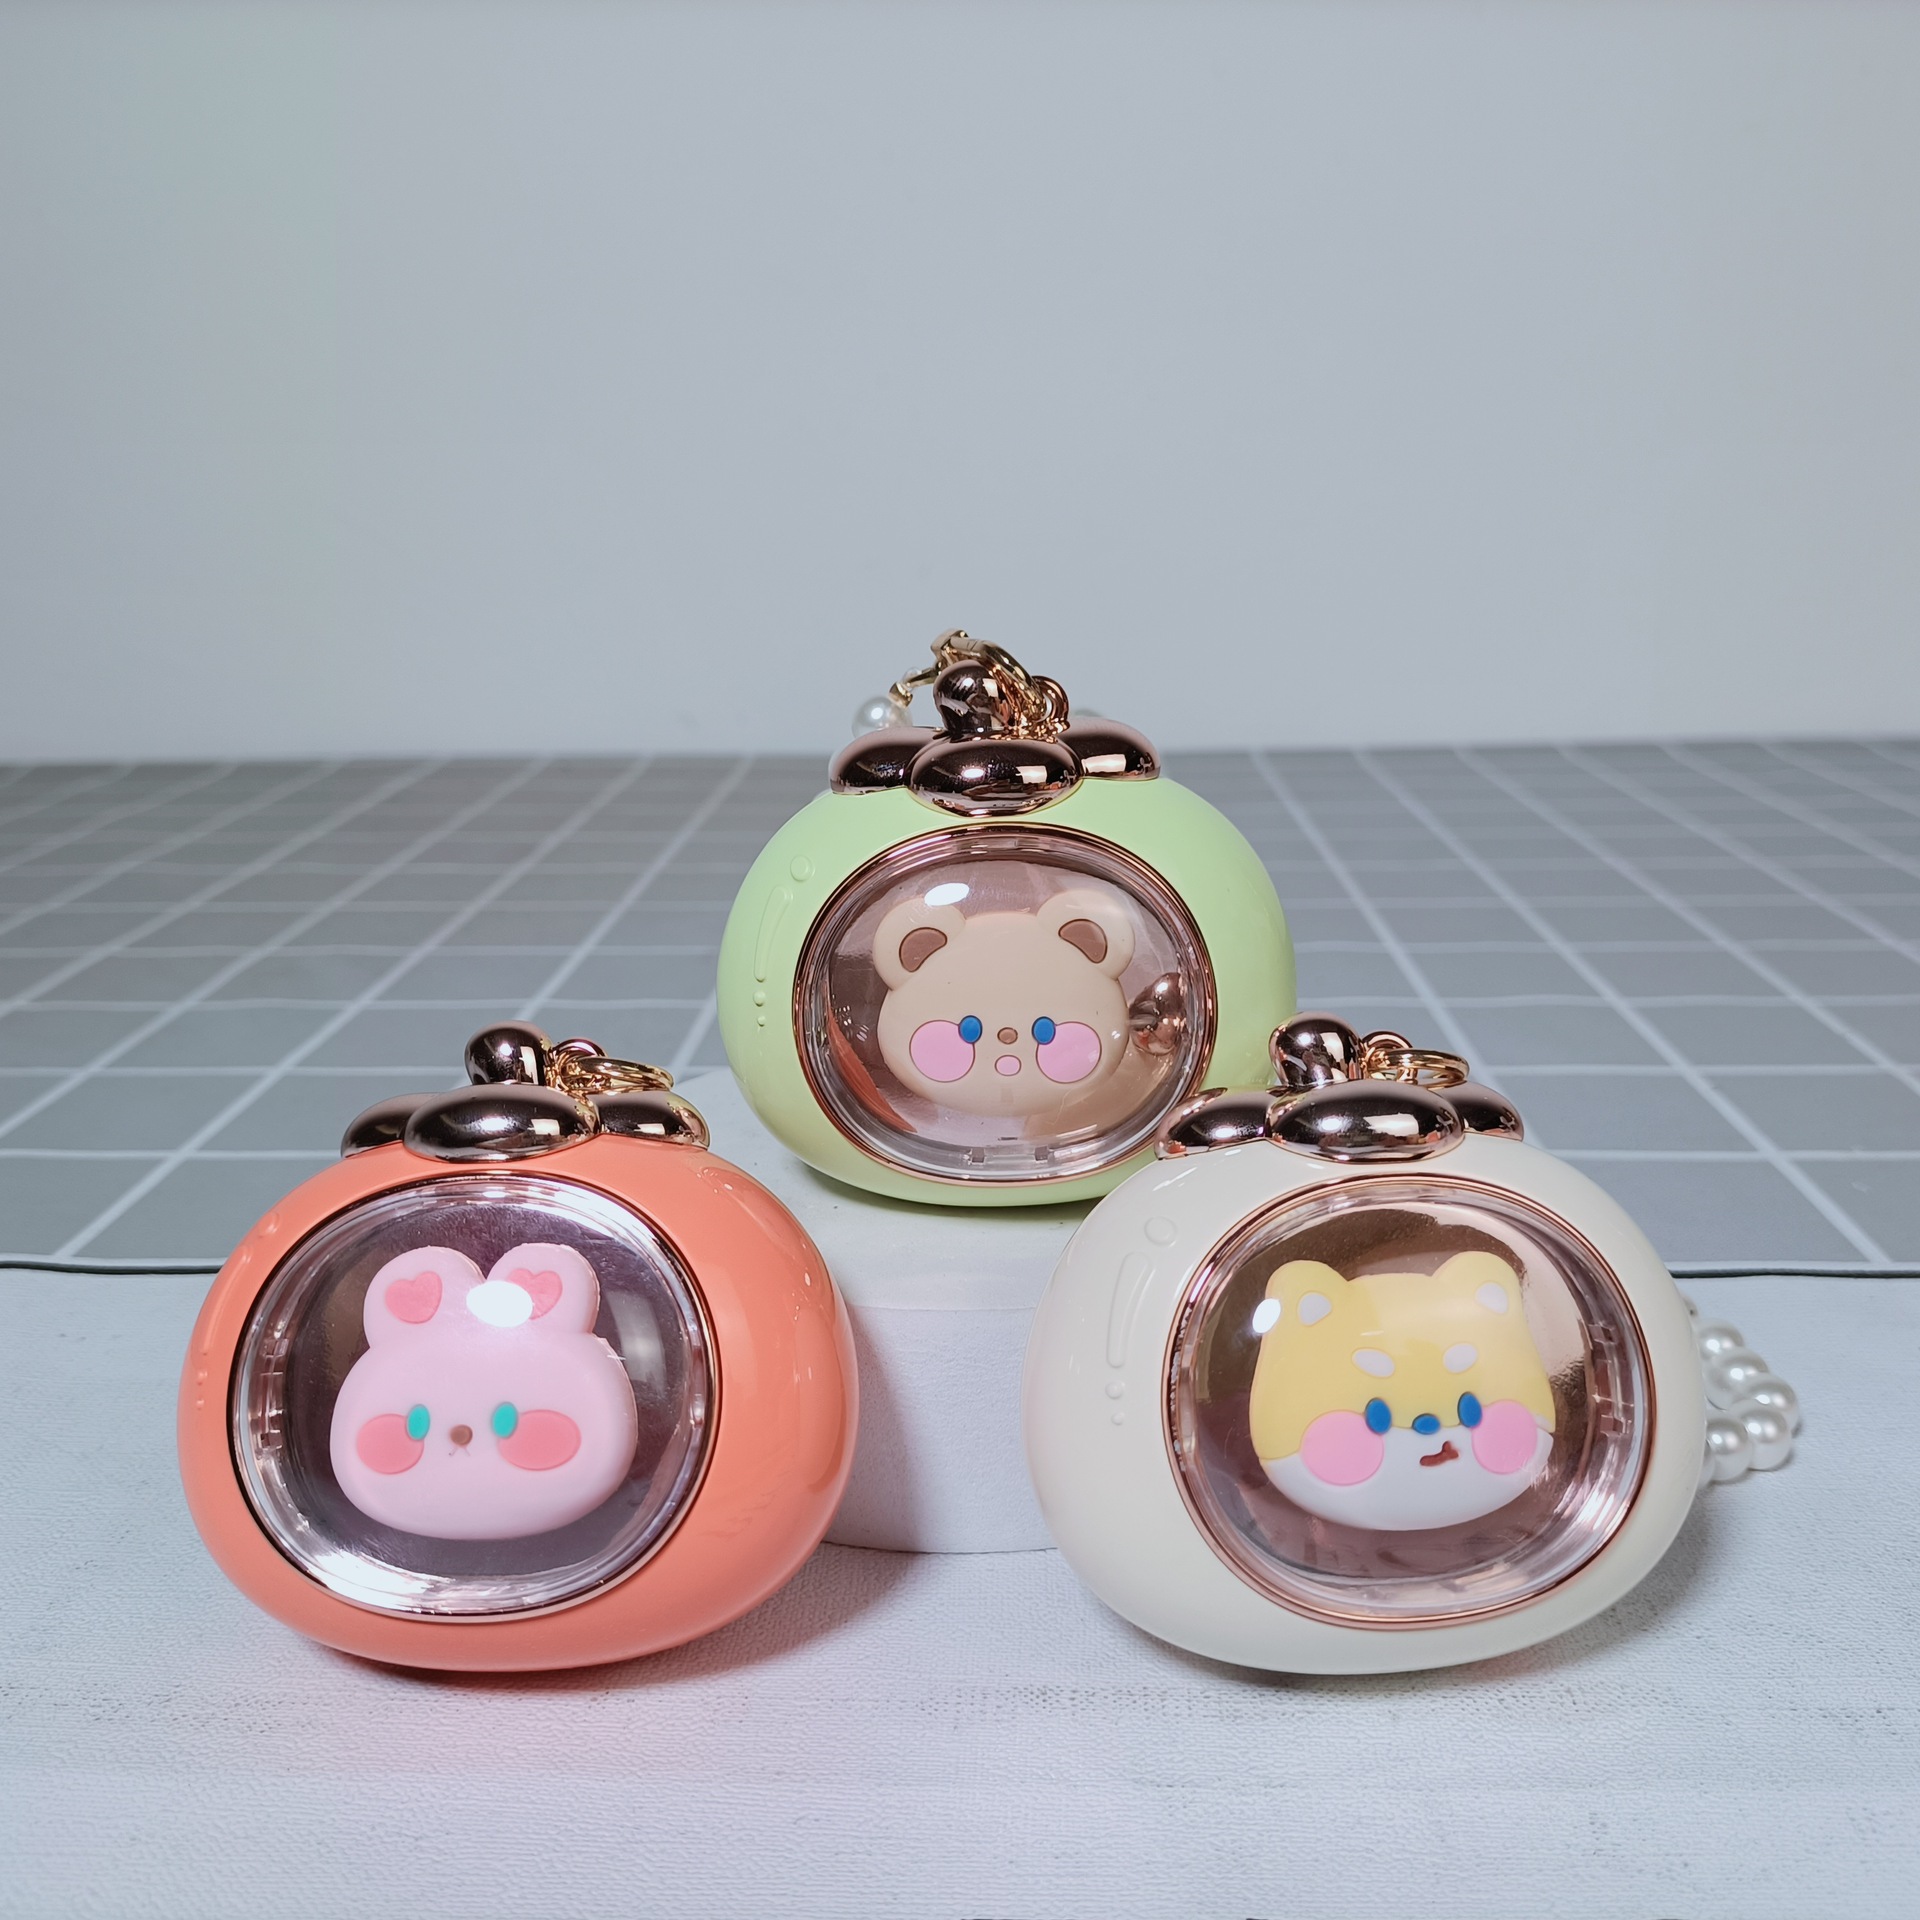 Full of Vitality Persimmon into Two Hand Warmer Hand-Held Girls Winter Pocket with Hand Bead USB Charging Girls Gift